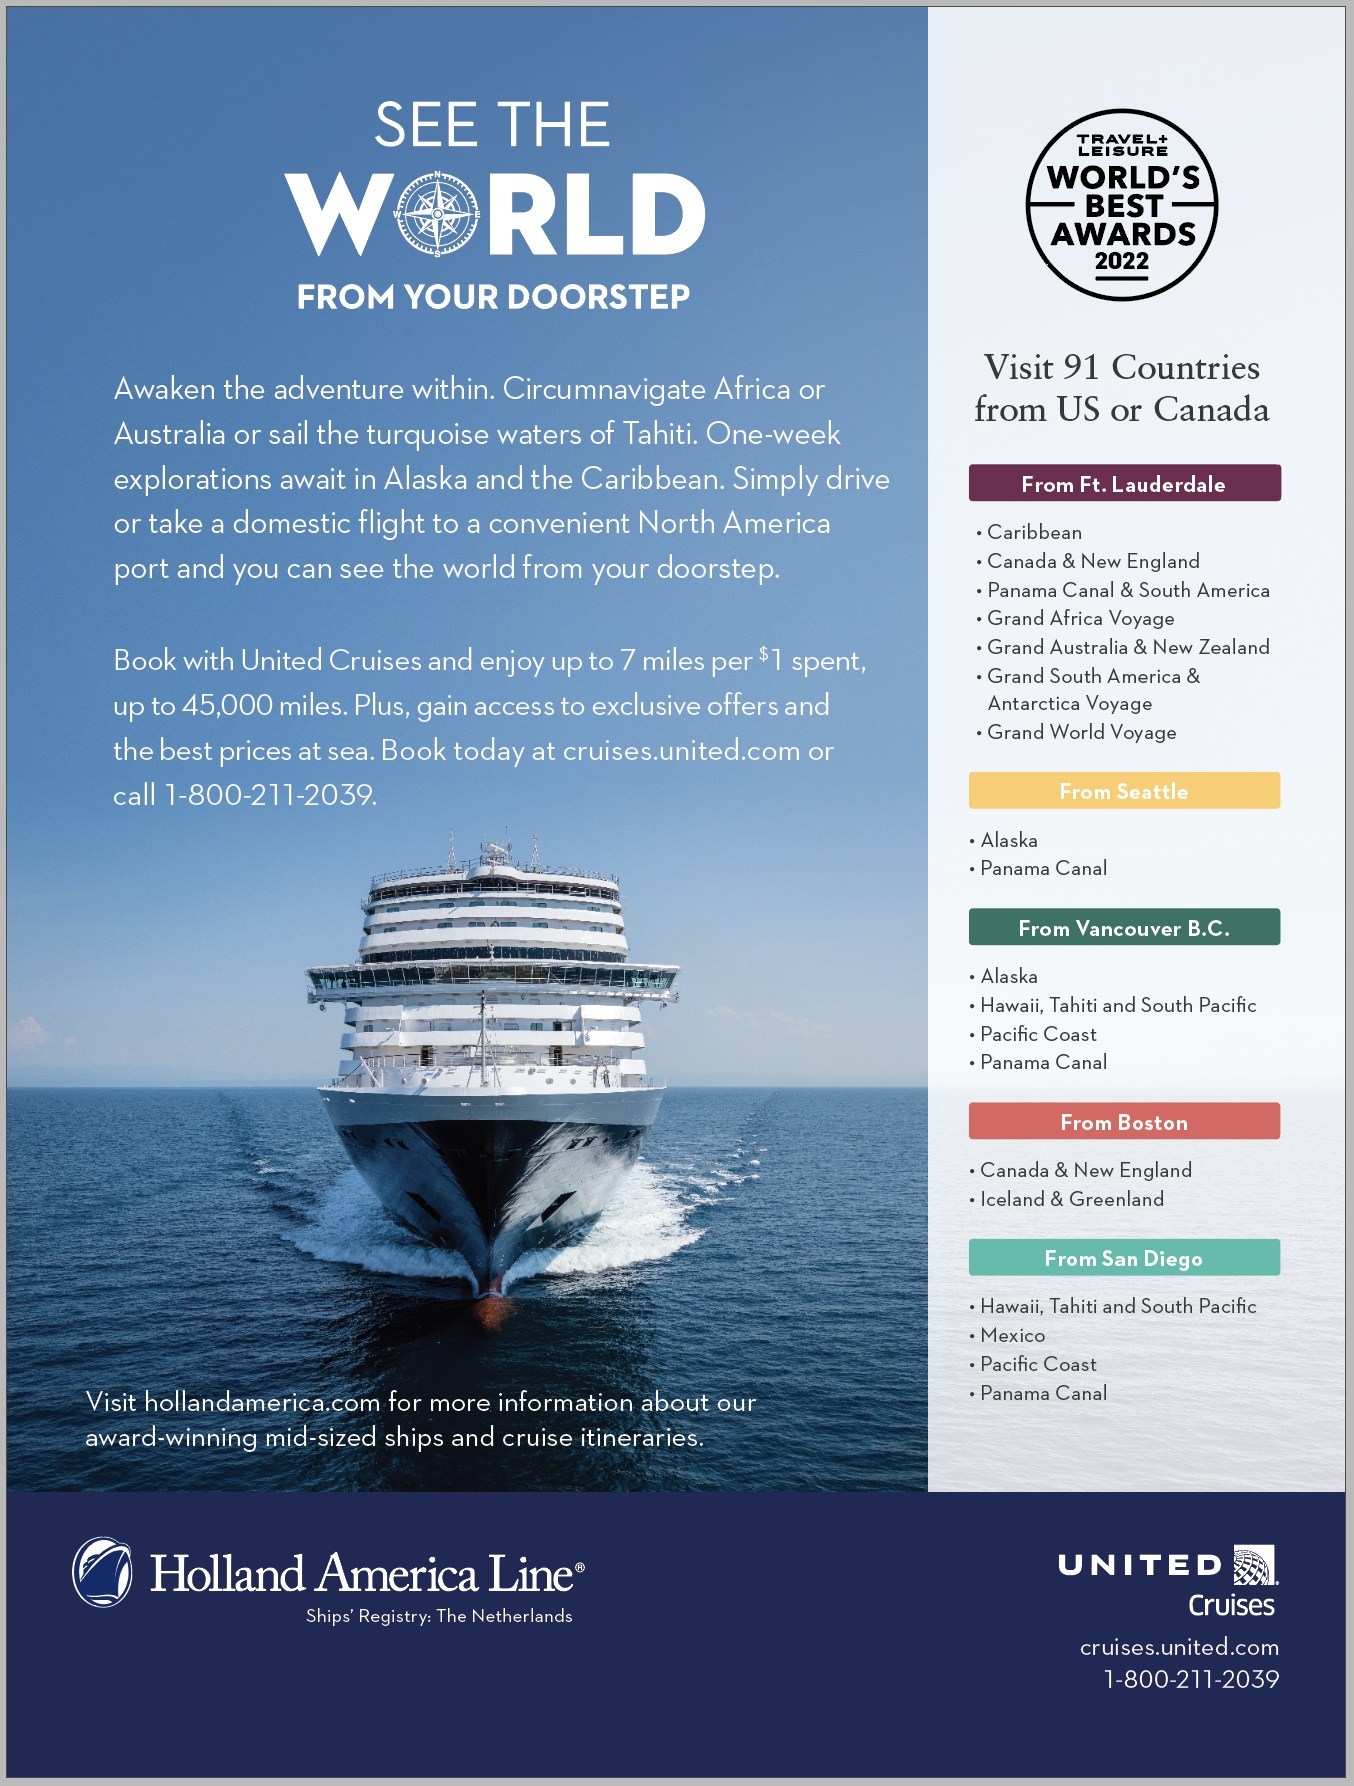 With a rise in travelers wanting to explore global destinations without taking international flights, Holland America Line is launching its ‘See the World from Your Doorstep’ campaign, highlighting the cruise line’s leadership in roundtrip travel from U.S. homeports    (Image at LateCruiseNews.com - August 2022)